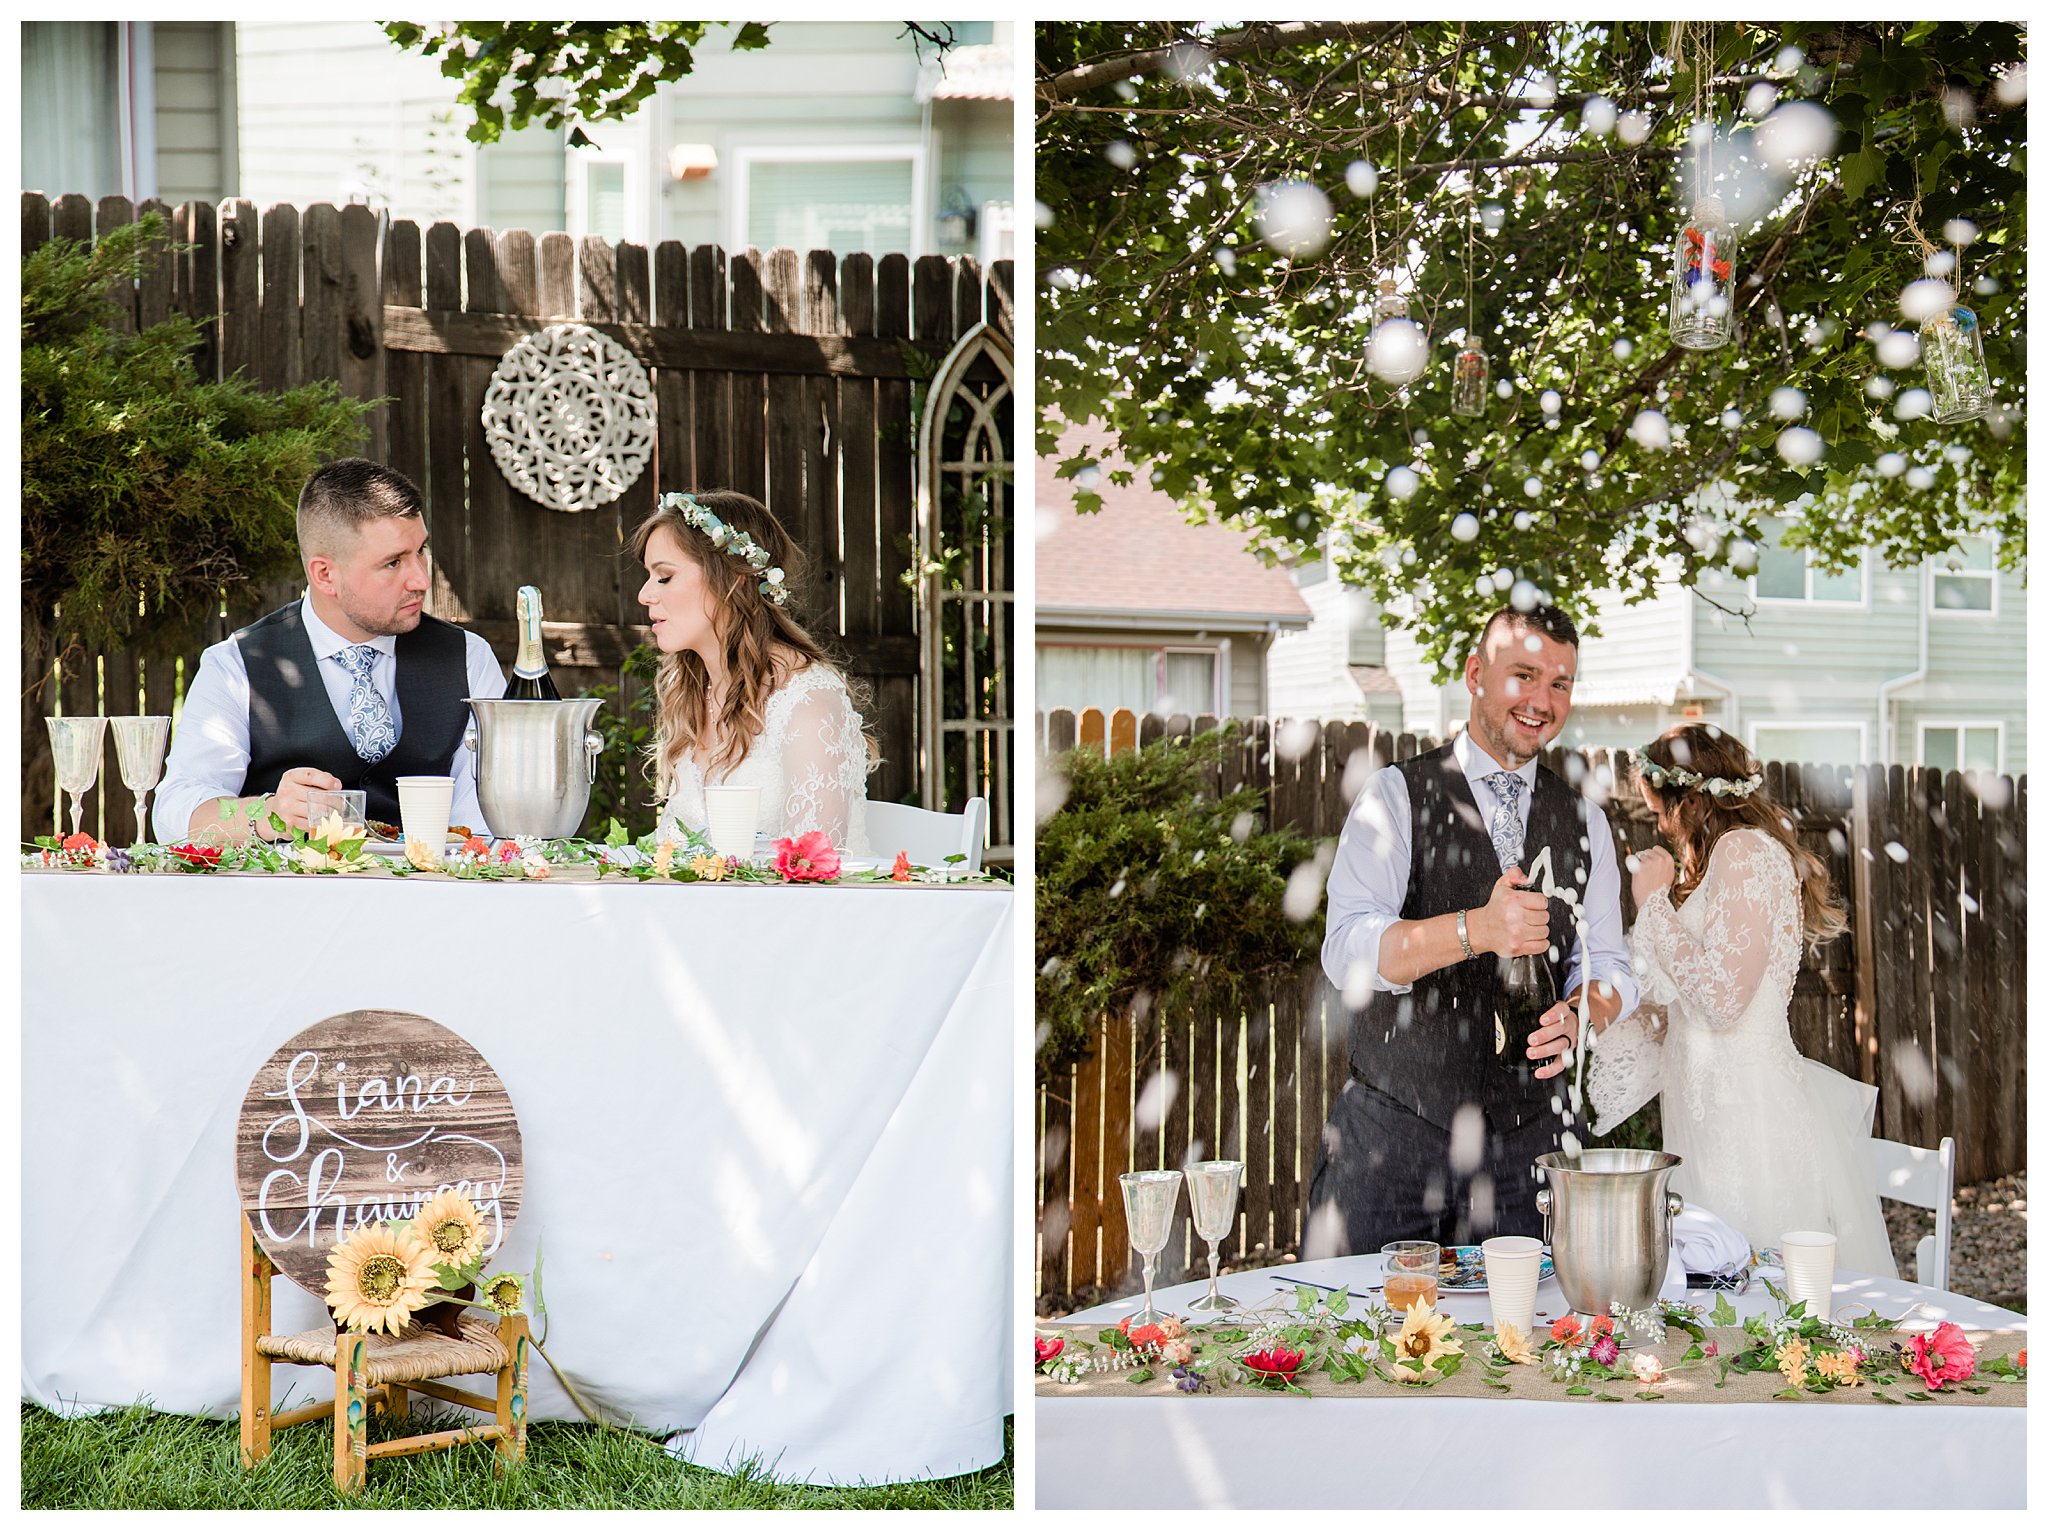 The couples toasts by popping a bottle of champagne